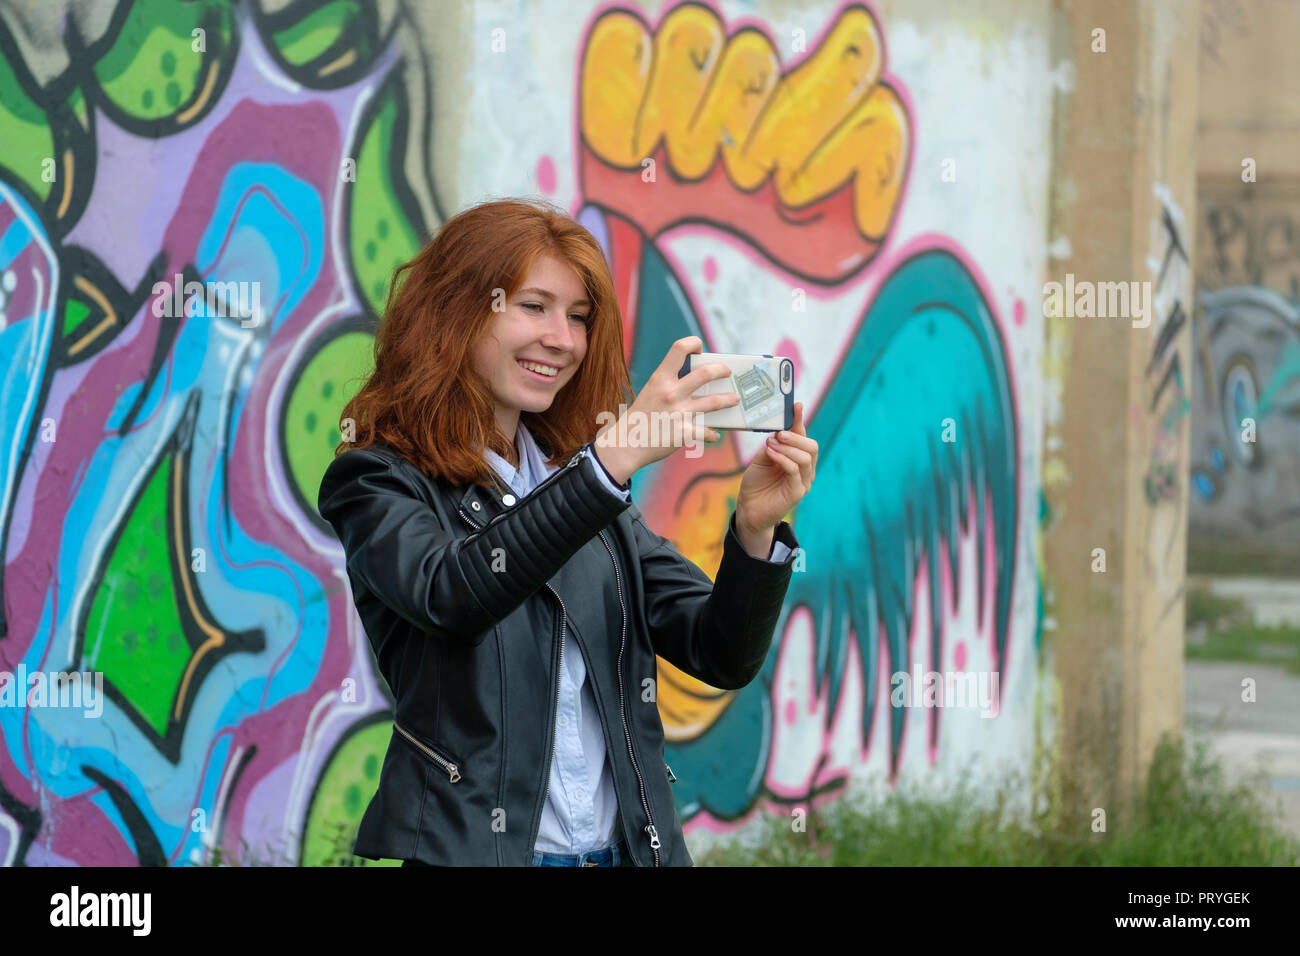 Redheaded girl, young woman in leather jacket making a selfie with her smartphone in front of graffiti, near Finale Ligure Stock Photo